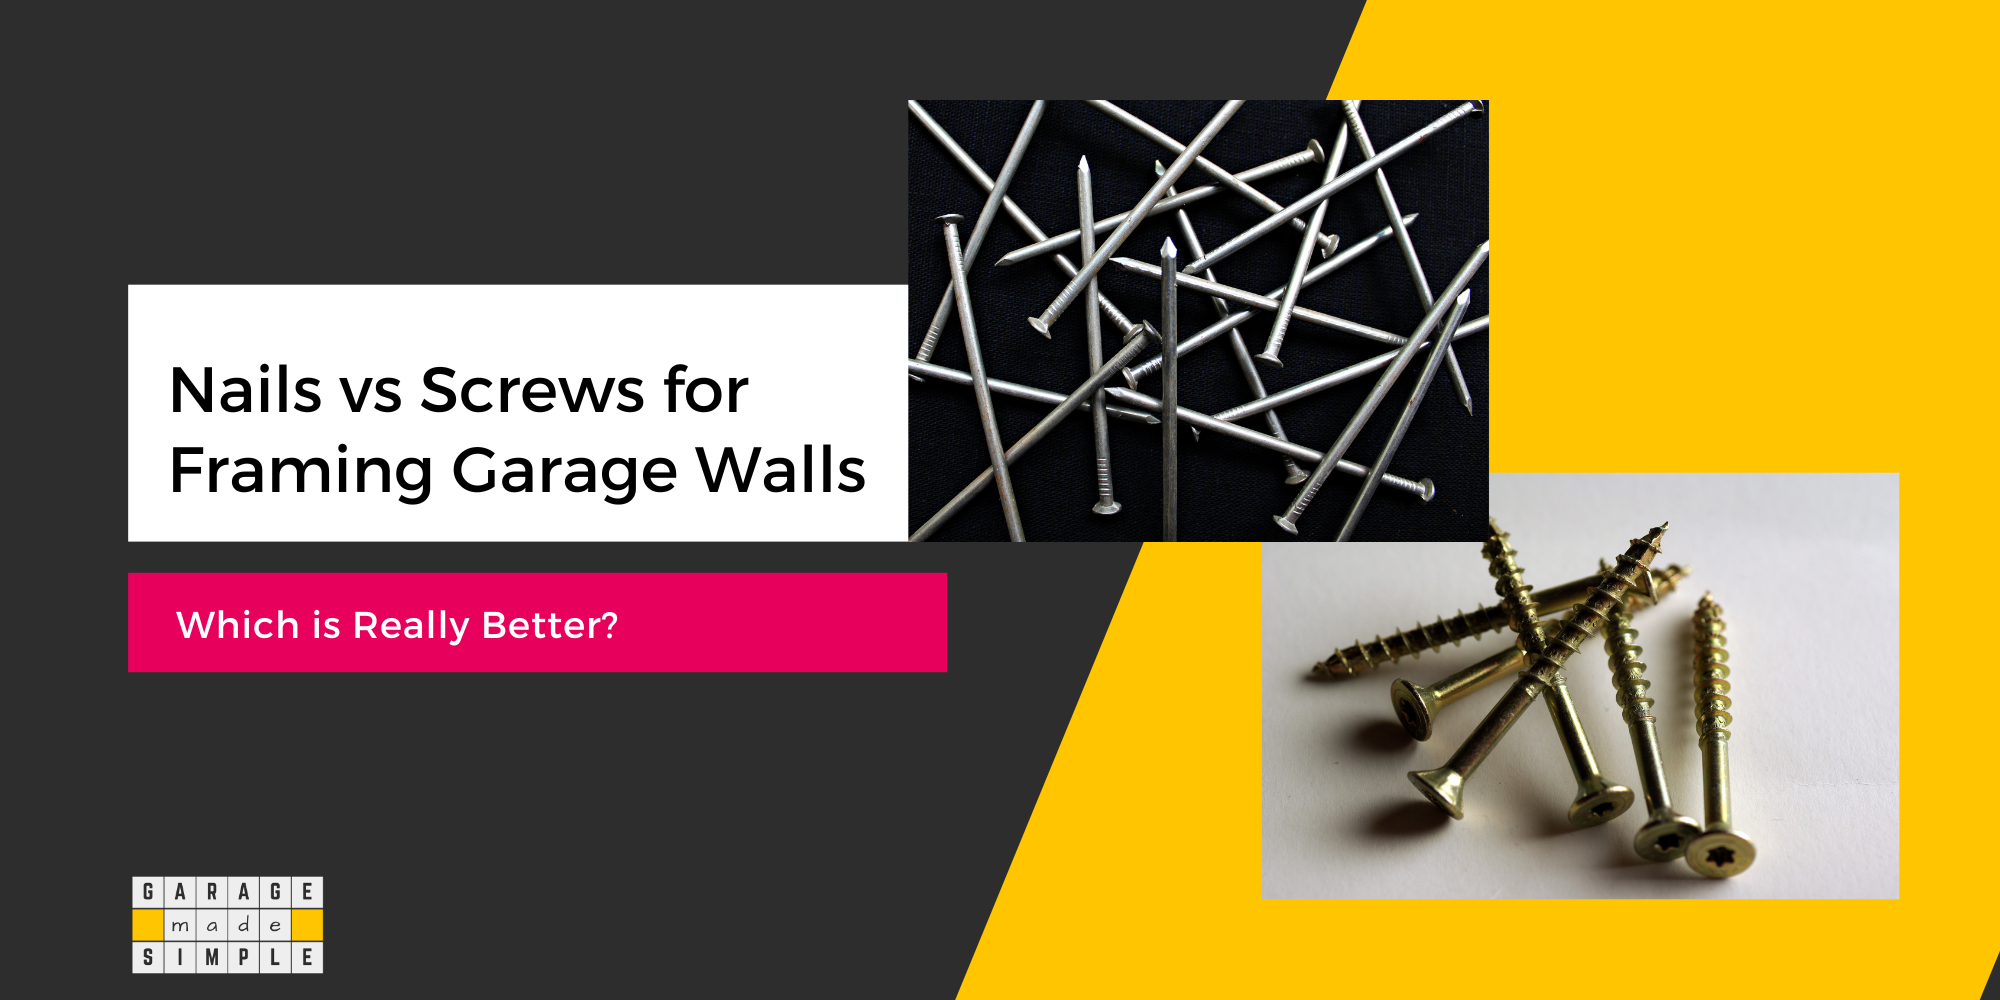 Nails vs Screws for Framing Garage Walls: Which is Really Better?